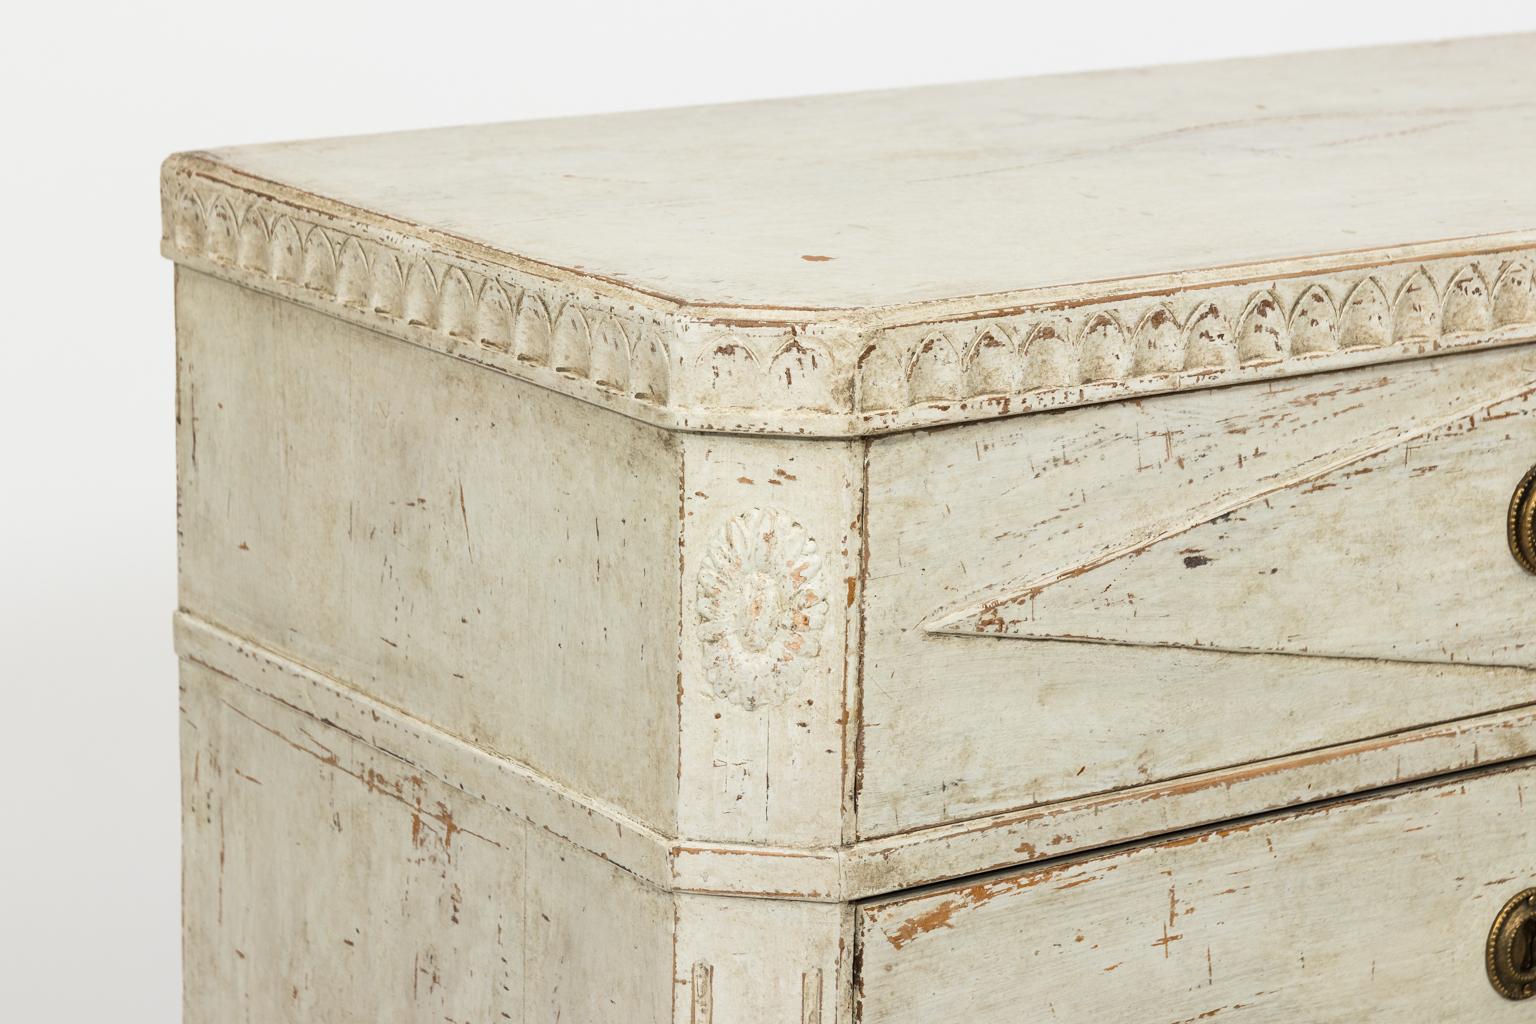 Painted Pair of Gustavian Commodes